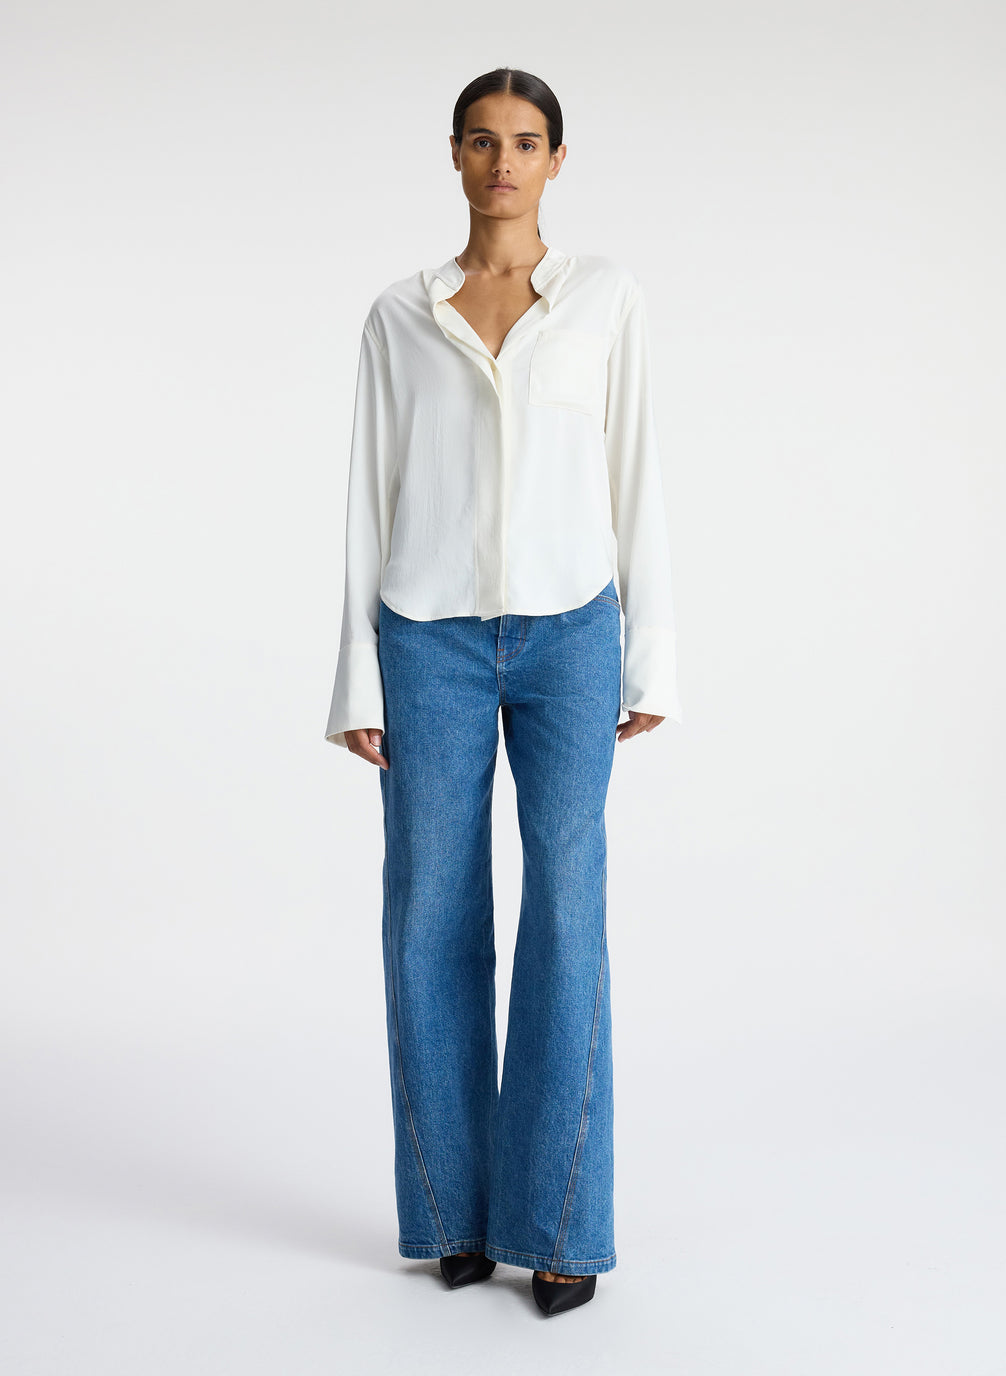 front view of woman wearing white satin long sleeve button down and medium blue wash denim jeans